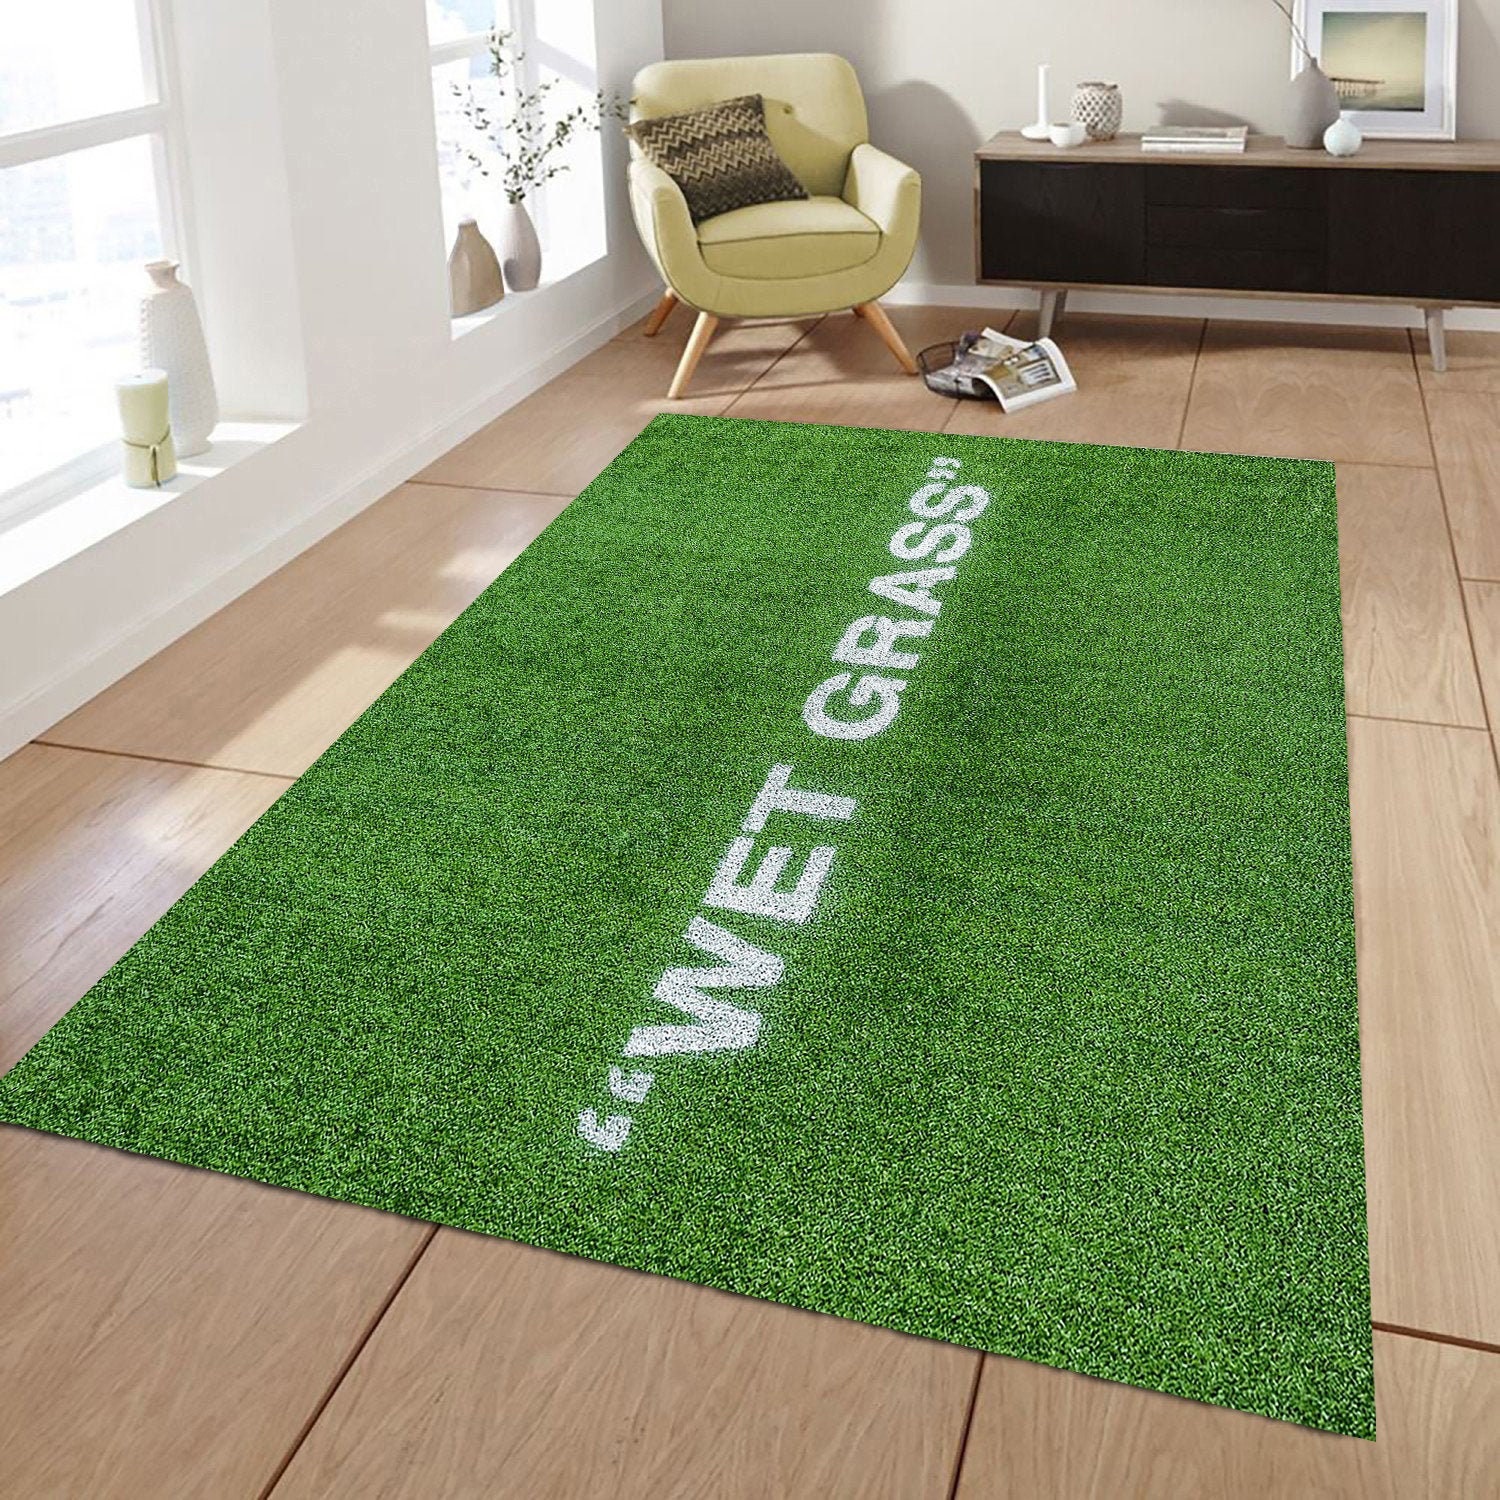 Wet Grass Patterned Rug, Wet Grass Rug, Wet Grass, 3D Patterned Non Slip  Soft Rug, Thick Rug, Home Decor Rug, Living Room Rug, Indoor Rugs 